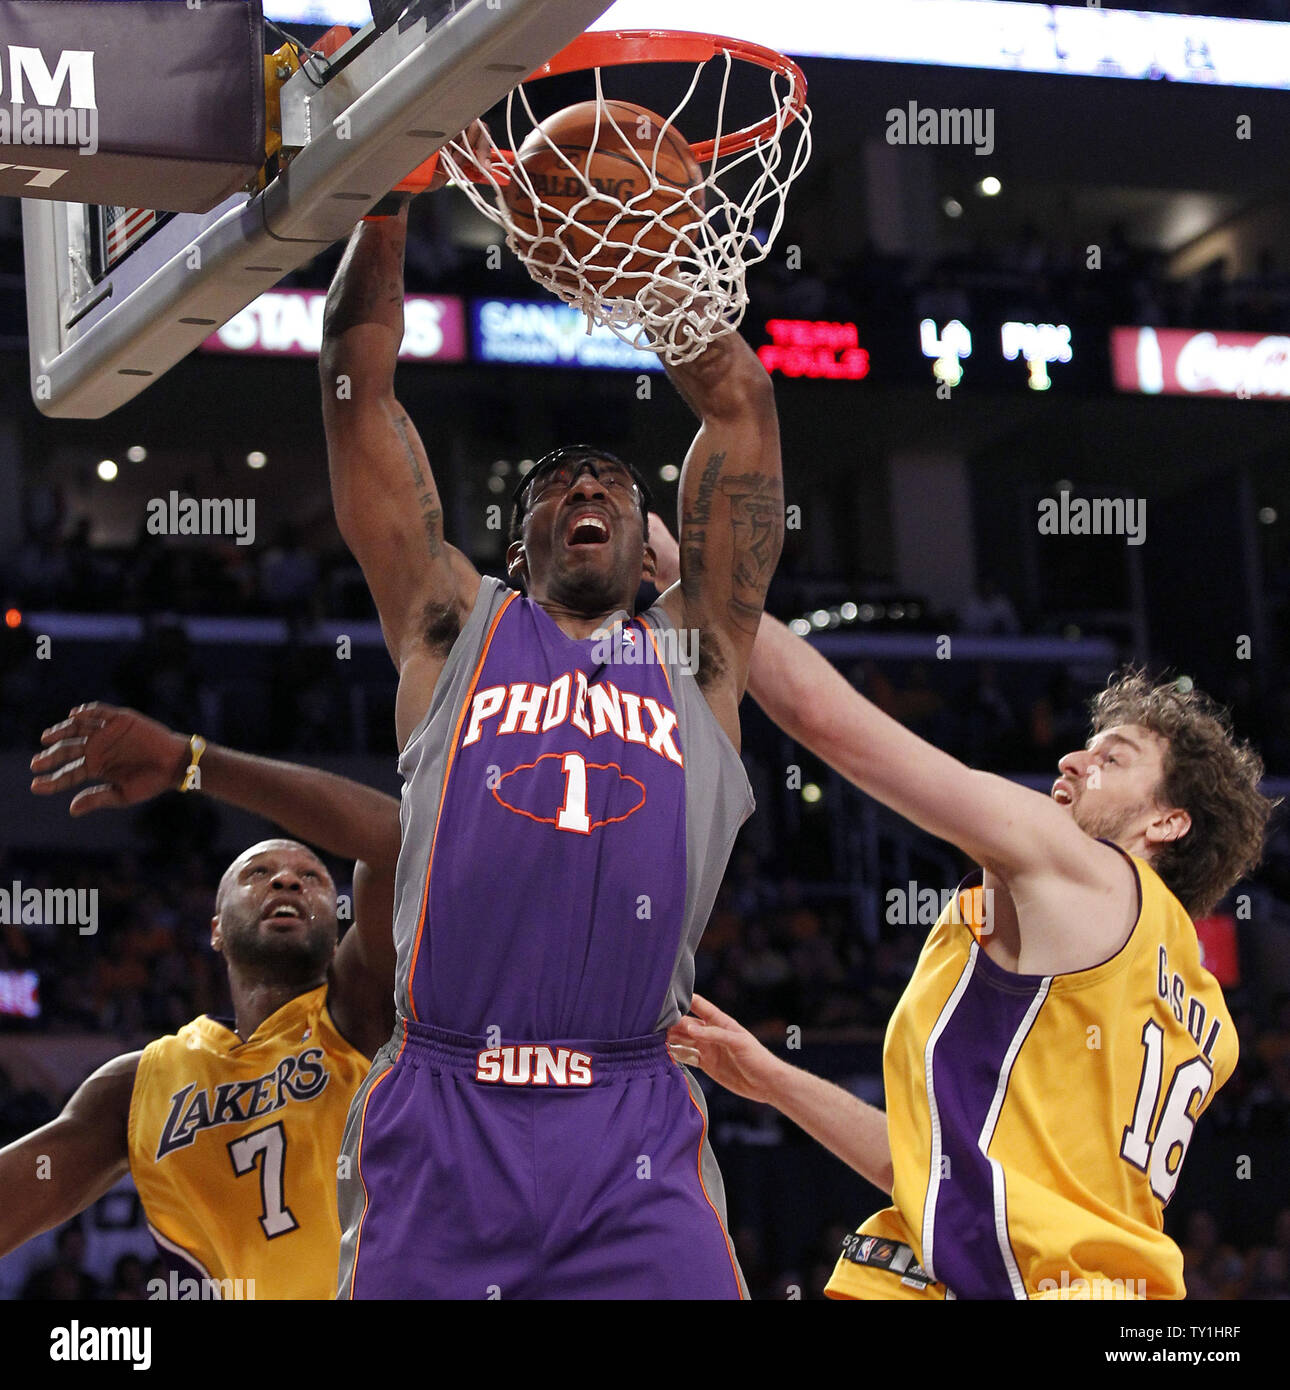 Phoenix Suns forward Amare Stoudemire (1) dunks over Los Angeles Lakers forward Lamar Odom, left, and Pau Gasol, right,  during the first half of Game 1 of their Western Conference Finals series at Staples Center in Los Angeles on May 17, 2010. The Lakers won 128-107 . UPI Photo/Lori Shepler Stock Photo